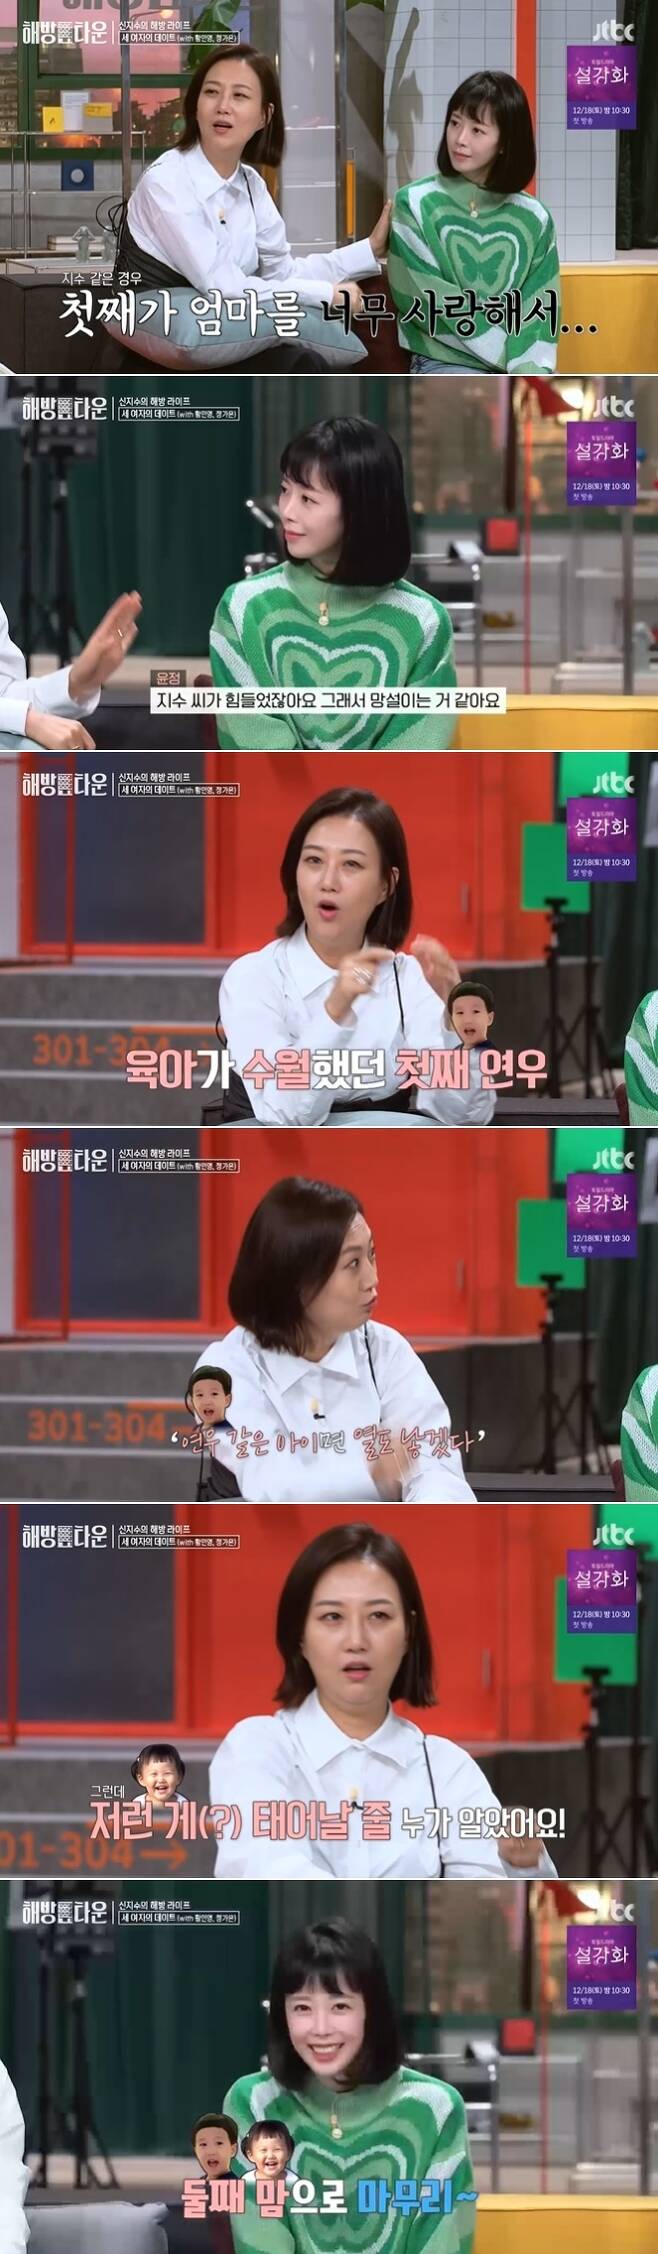 Jang Yun-jeong emphasized, I will finish with Ha-yeong for the second time without a third.JTBC Where I Return to Me - Liberation Town broadcast on December 10, Shin Ji-soo, Hwang In-young and Jeong Ga-eun, who talked about parenting, were featured in the audiences sympathy.The three mothers who raised their daughters talked about the subject of second.Jang Yun-jeong, who has a sister and sister of Yeon Woo X Ha-yeong, heard the conversation and said, If the first was easy, the second thought would come. Shin Ji-soo liked his mother so much that it was hard.Our Yeon Woo was really easy: I had said to myself, This kid has even a fever.However, referring to his second daughter Ha-yeong, he laughed, saying, Who knew that would be born? Kim Shin-young added, It is the same as the president. He added a laugh by referring to the synchro rate of Ha-yeong and Jang Yun-jeong.